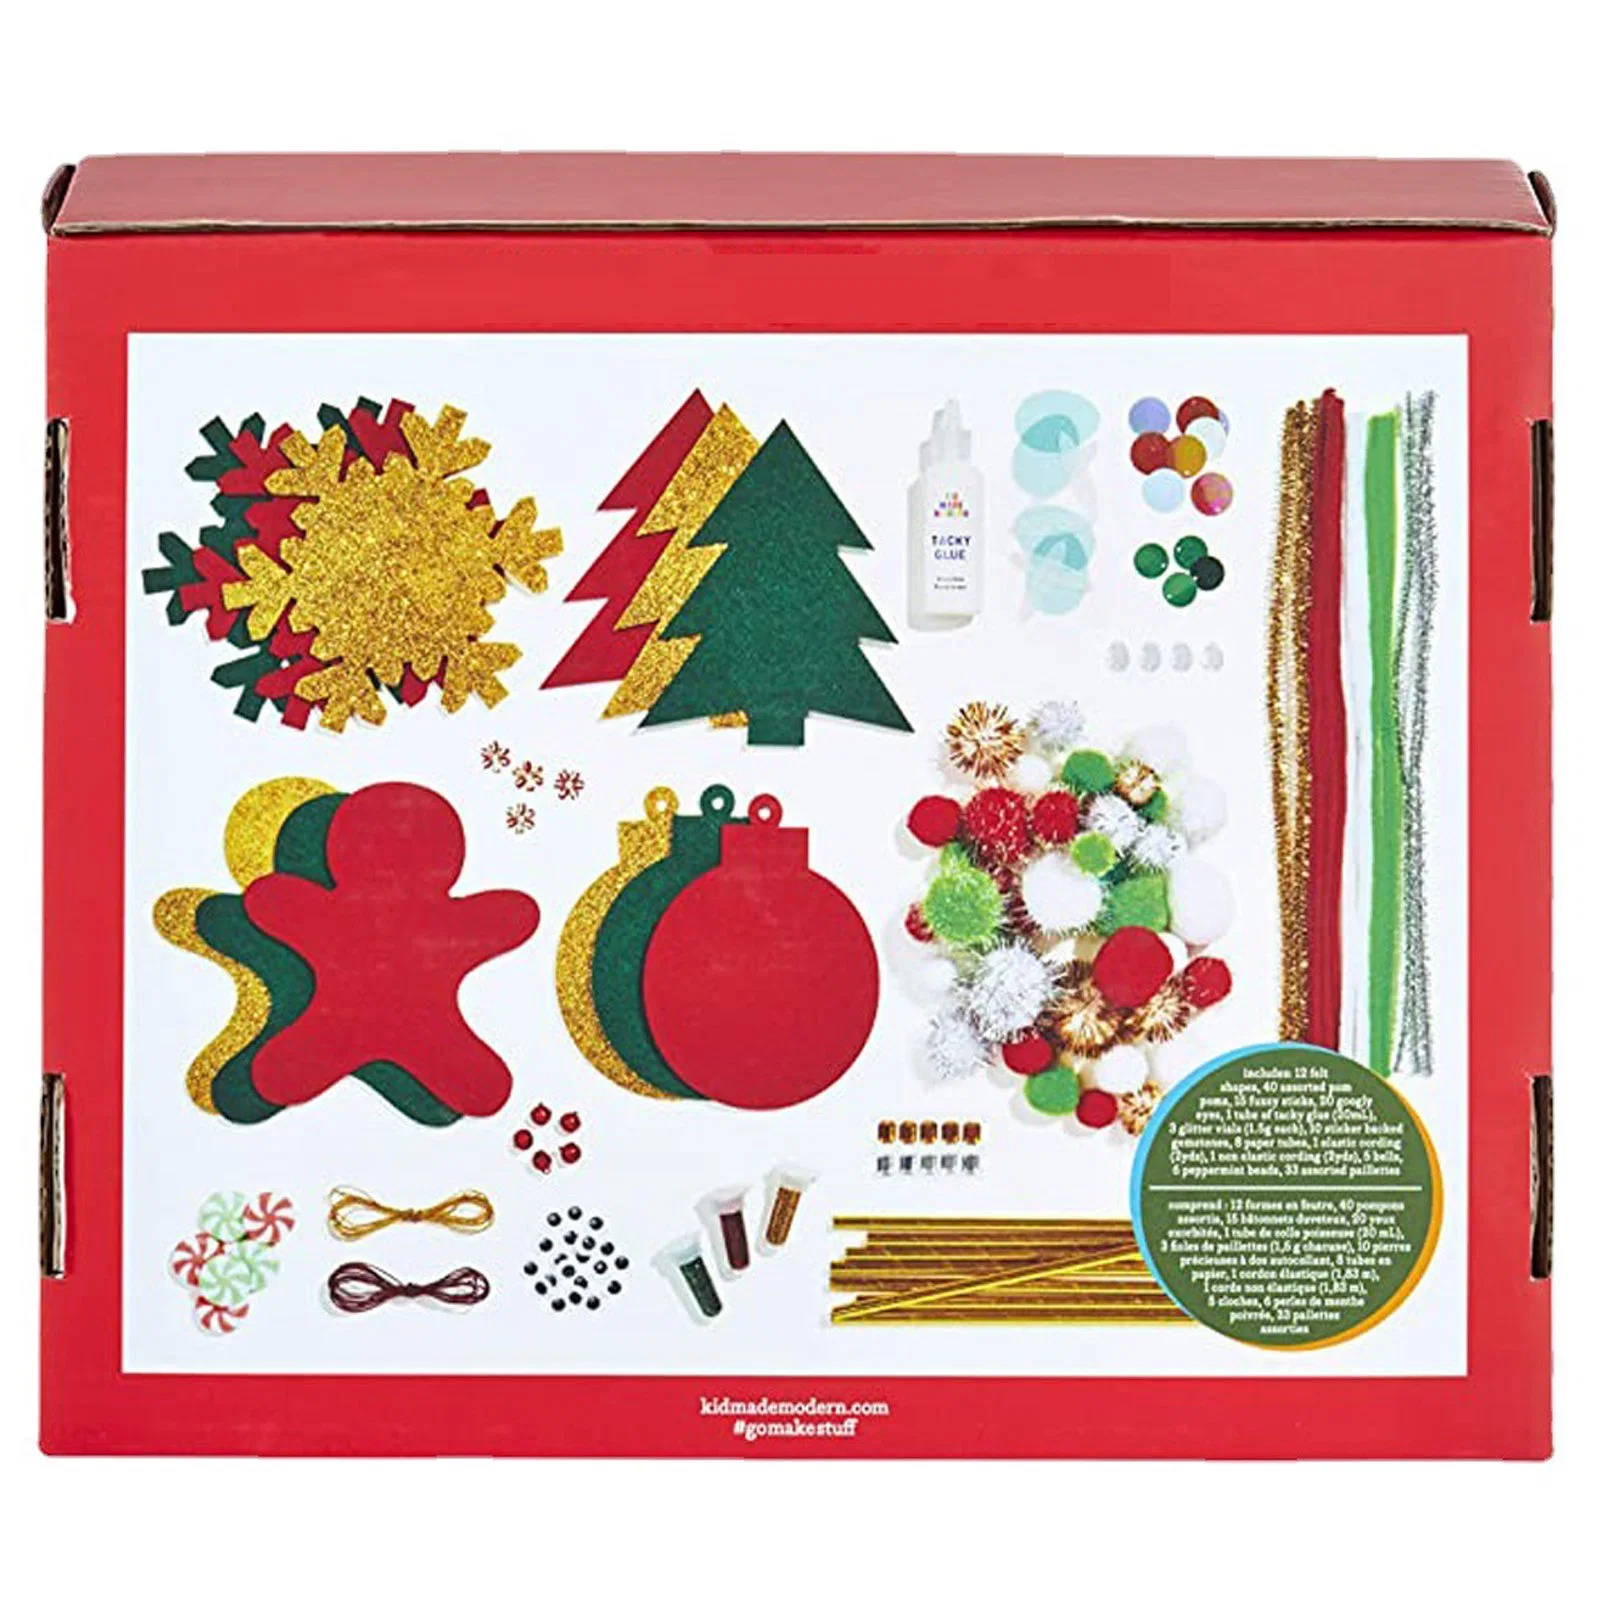 Christmas Tree Decorations & Ornament DIY Holiday Craft Kit for Kids